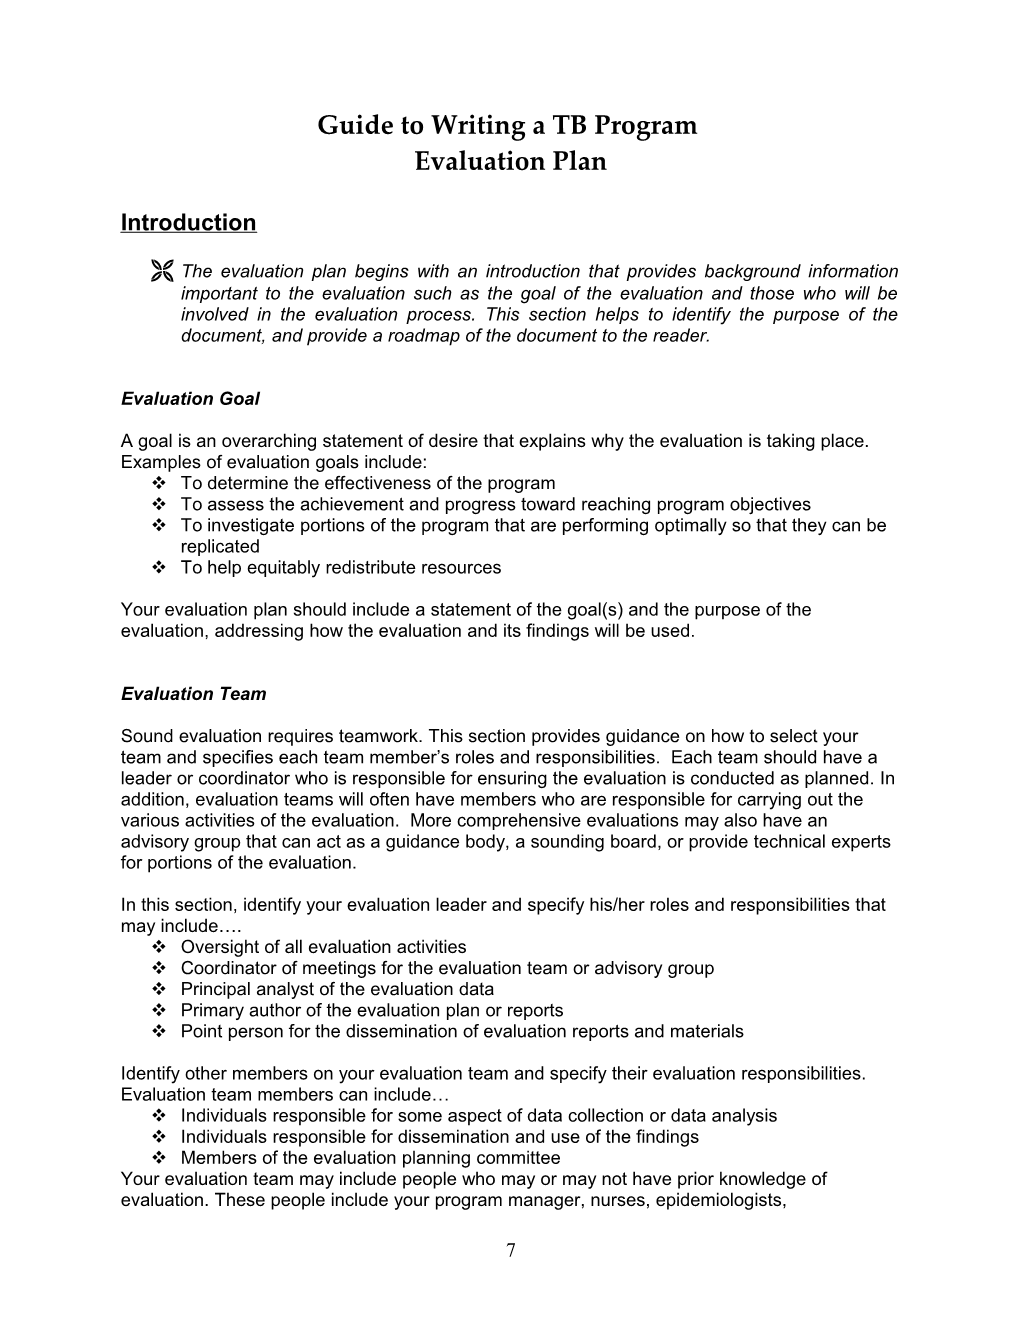 DTBE Program Evaluation Guide Guide to Writing a TB Program Evaluation Plan